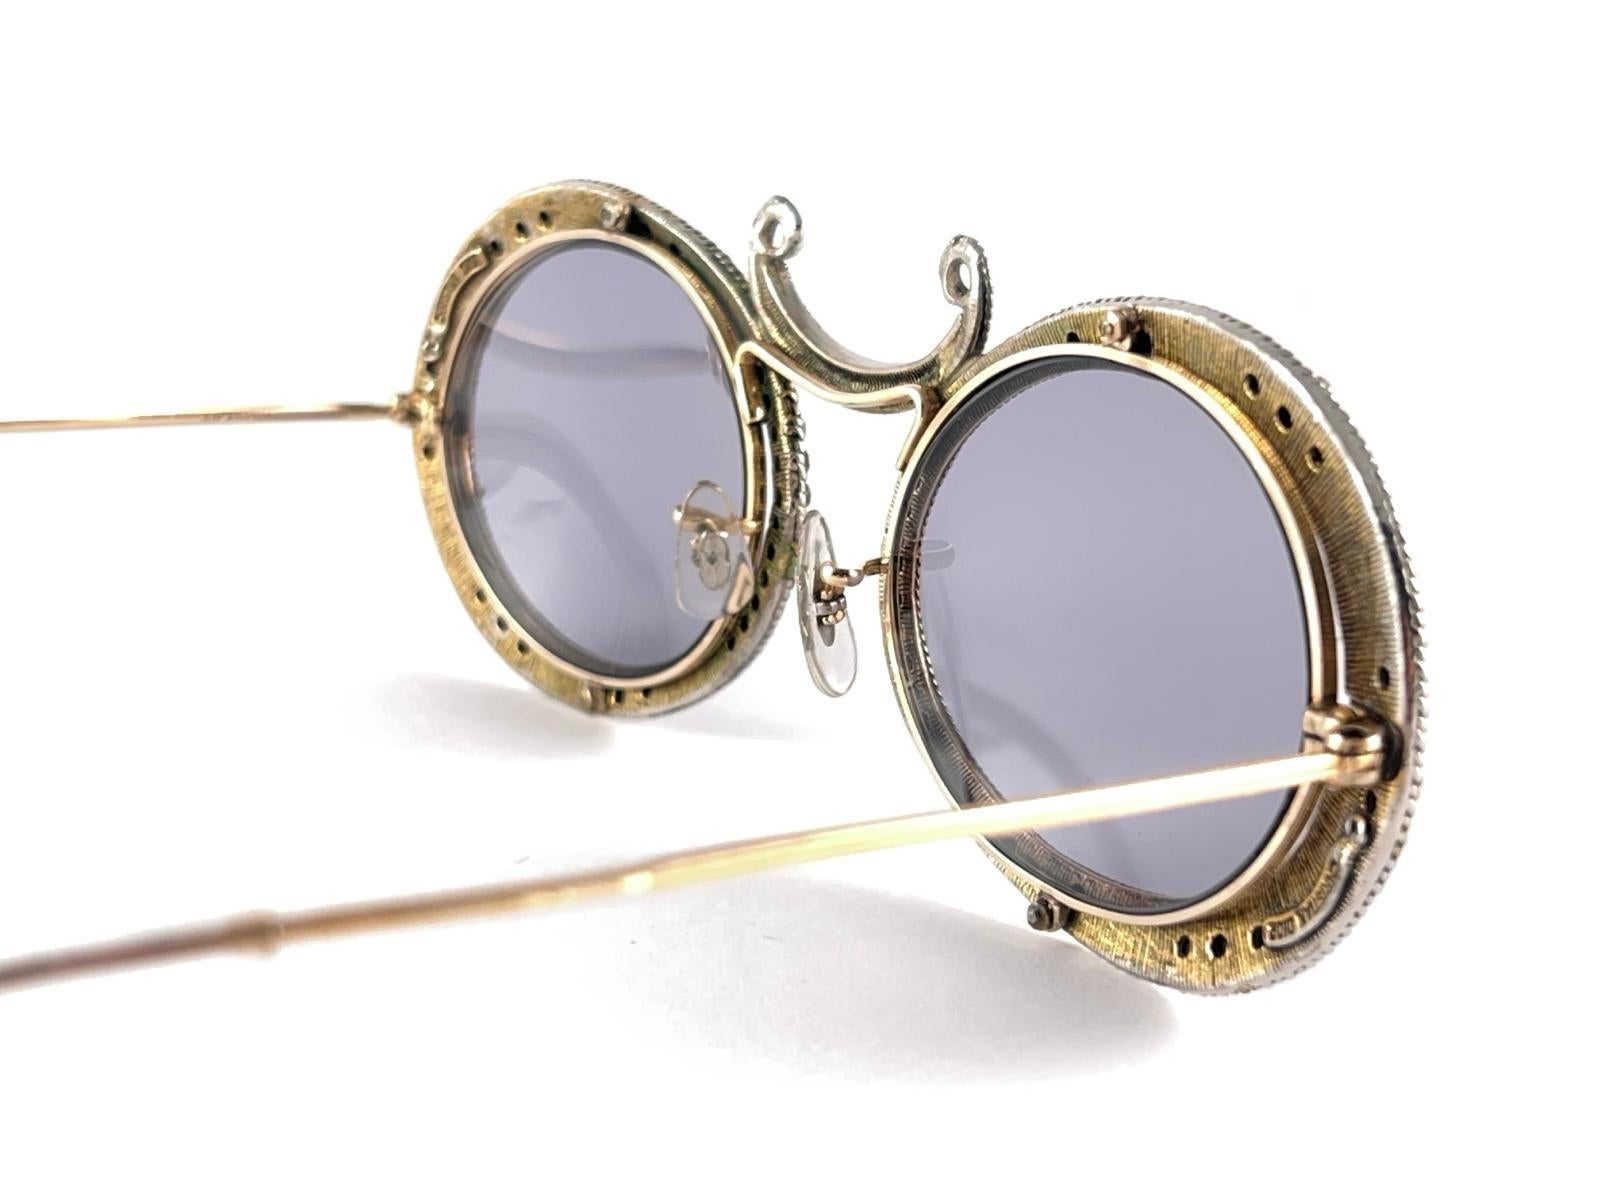 Ultra Rare 1960 Christian Dior Emaille Jewelled by Tura Collector Item Sonnenbrille im Angebot 2